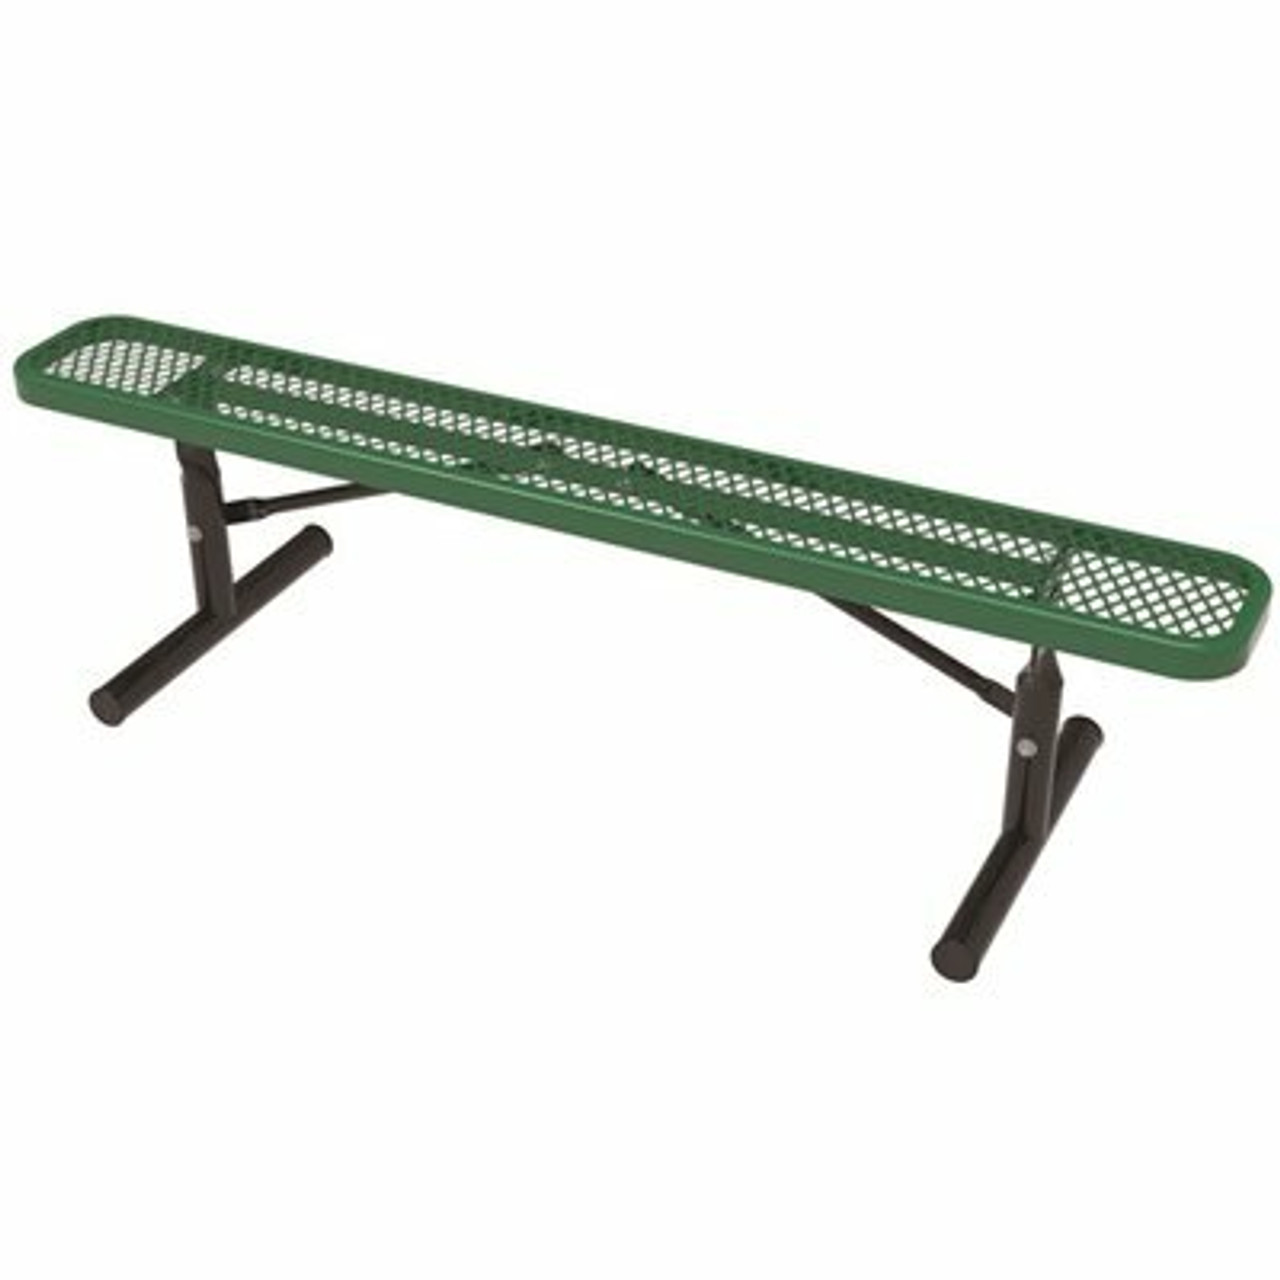 Everest 6 Ft. Green Portable Park Bench Without Back